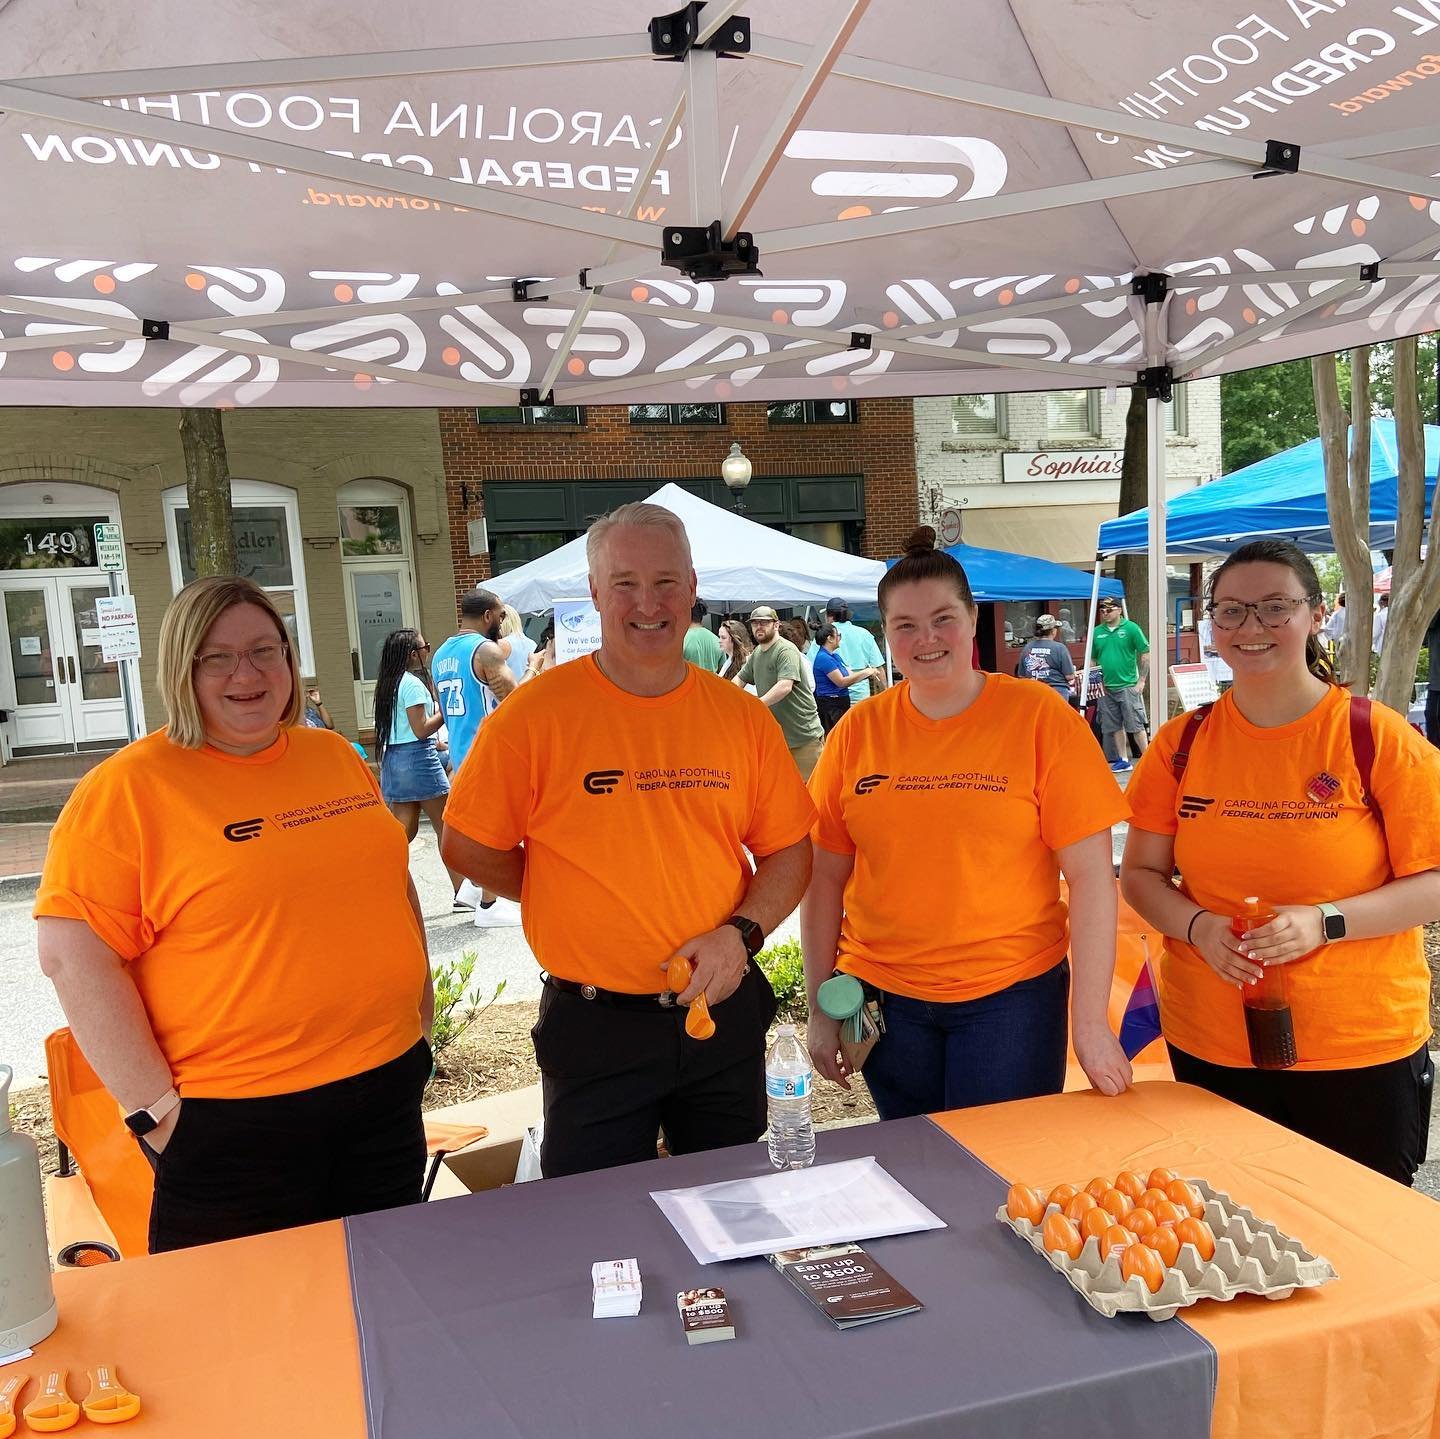 Silly putty, great weather, and&hellip; a robot?? Thank you to everyone who stopped by our table at Spartanburg&rsquo;s Spring Fling this weekend! 
🧡
🧡
🧡
#spartanburgsc #springfling #spartanburgspringfling #creditunion